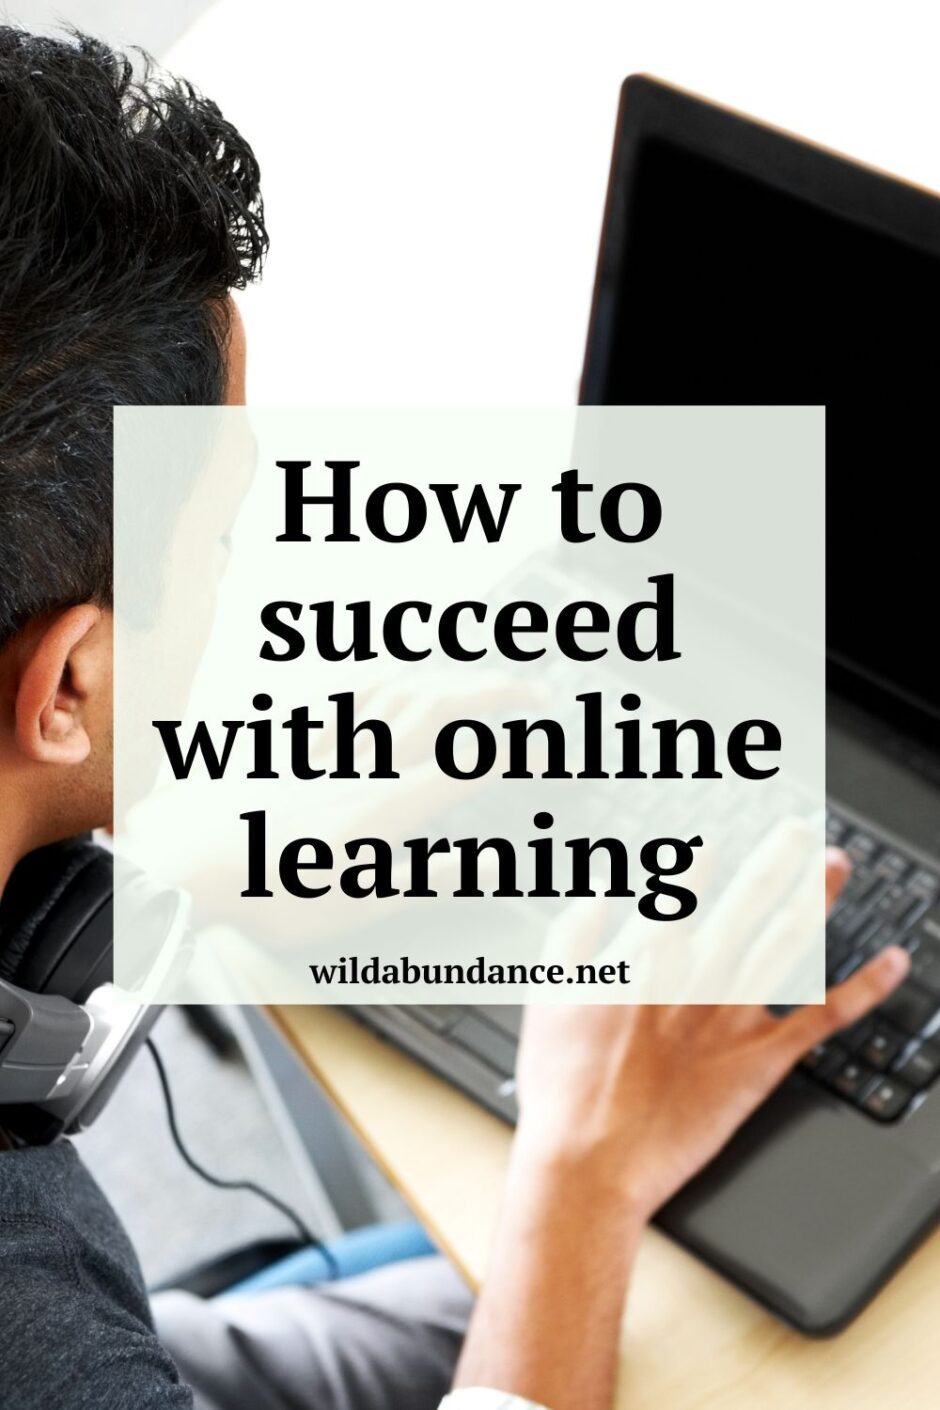 How to succeed with online learning